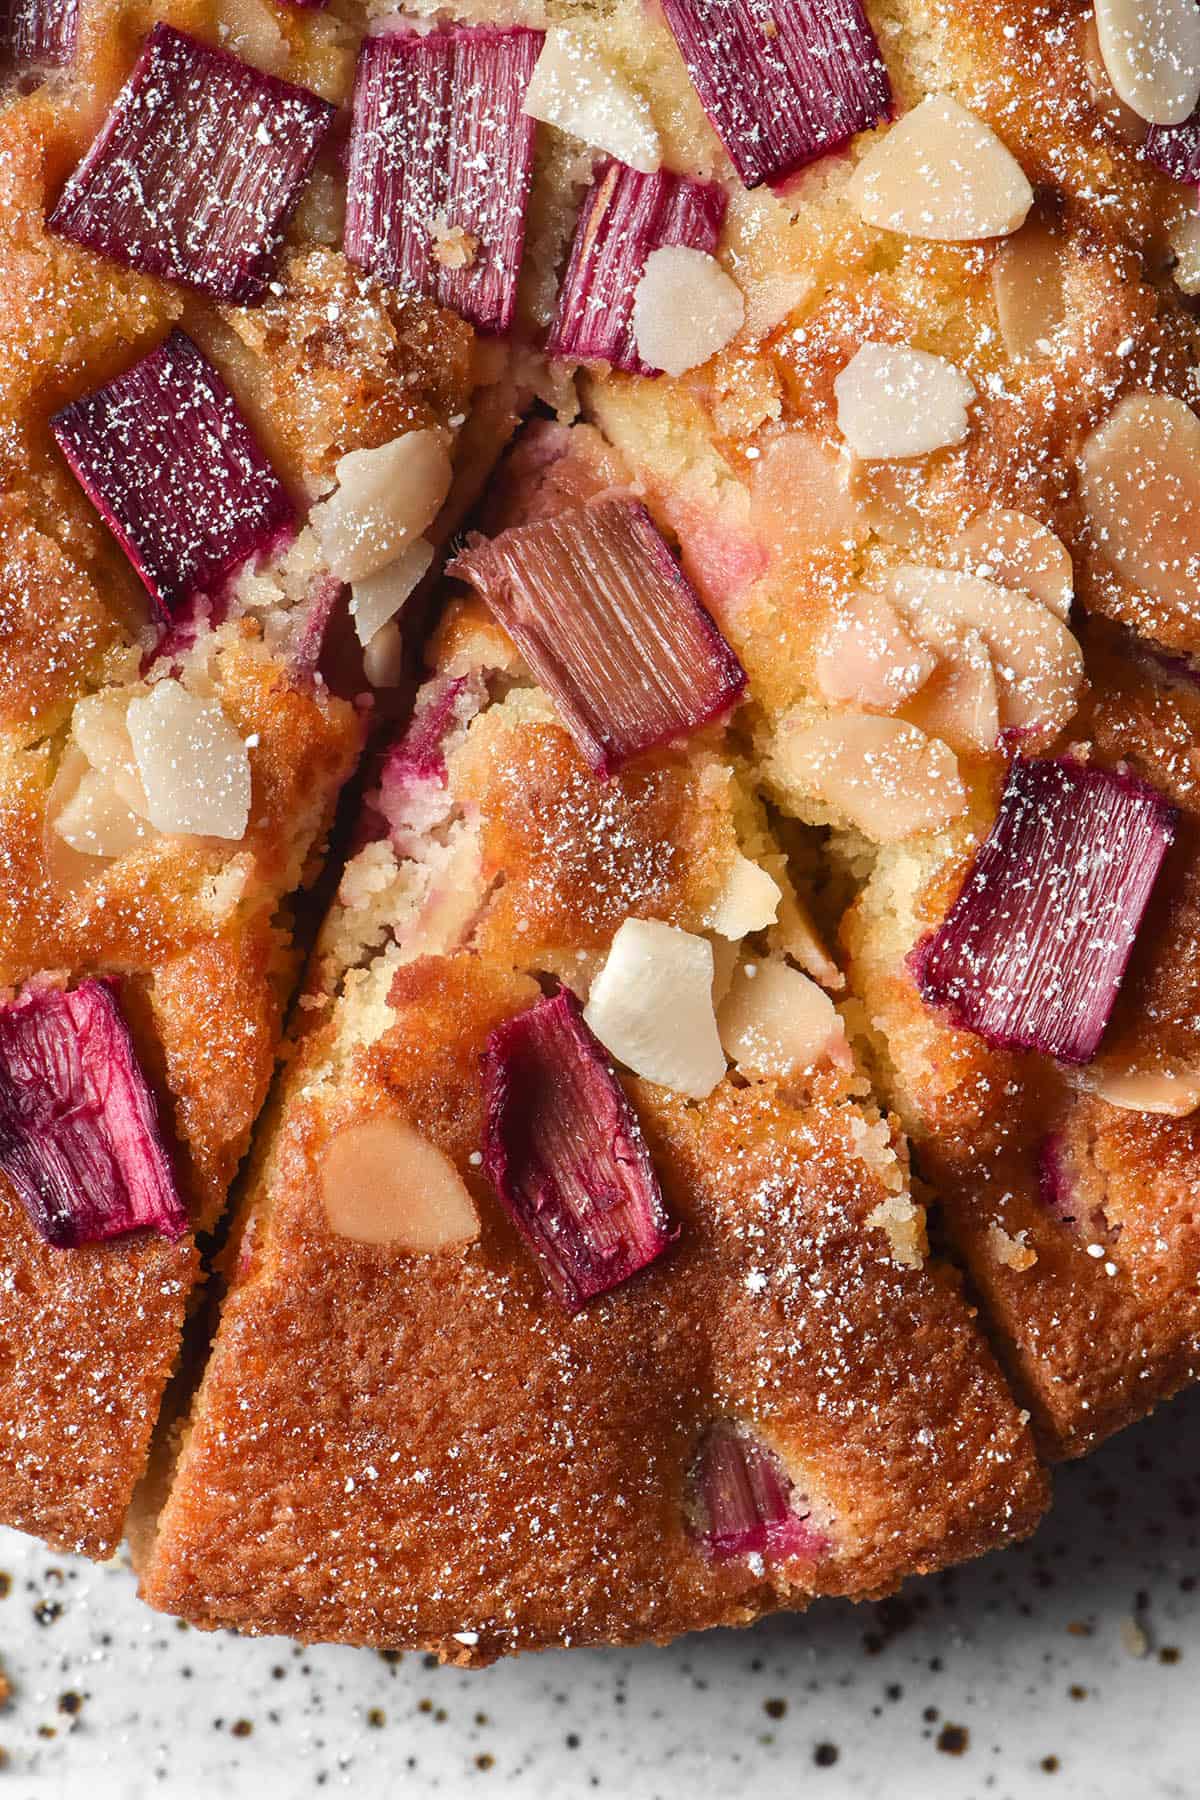 An aerial image of a gluten free rhubarb cake topped with icing sugar and flaked almonds. The cake is golden brown and sits atop a white speckled ceramic plate. The centre of the image is a slice about to be taken from the cake